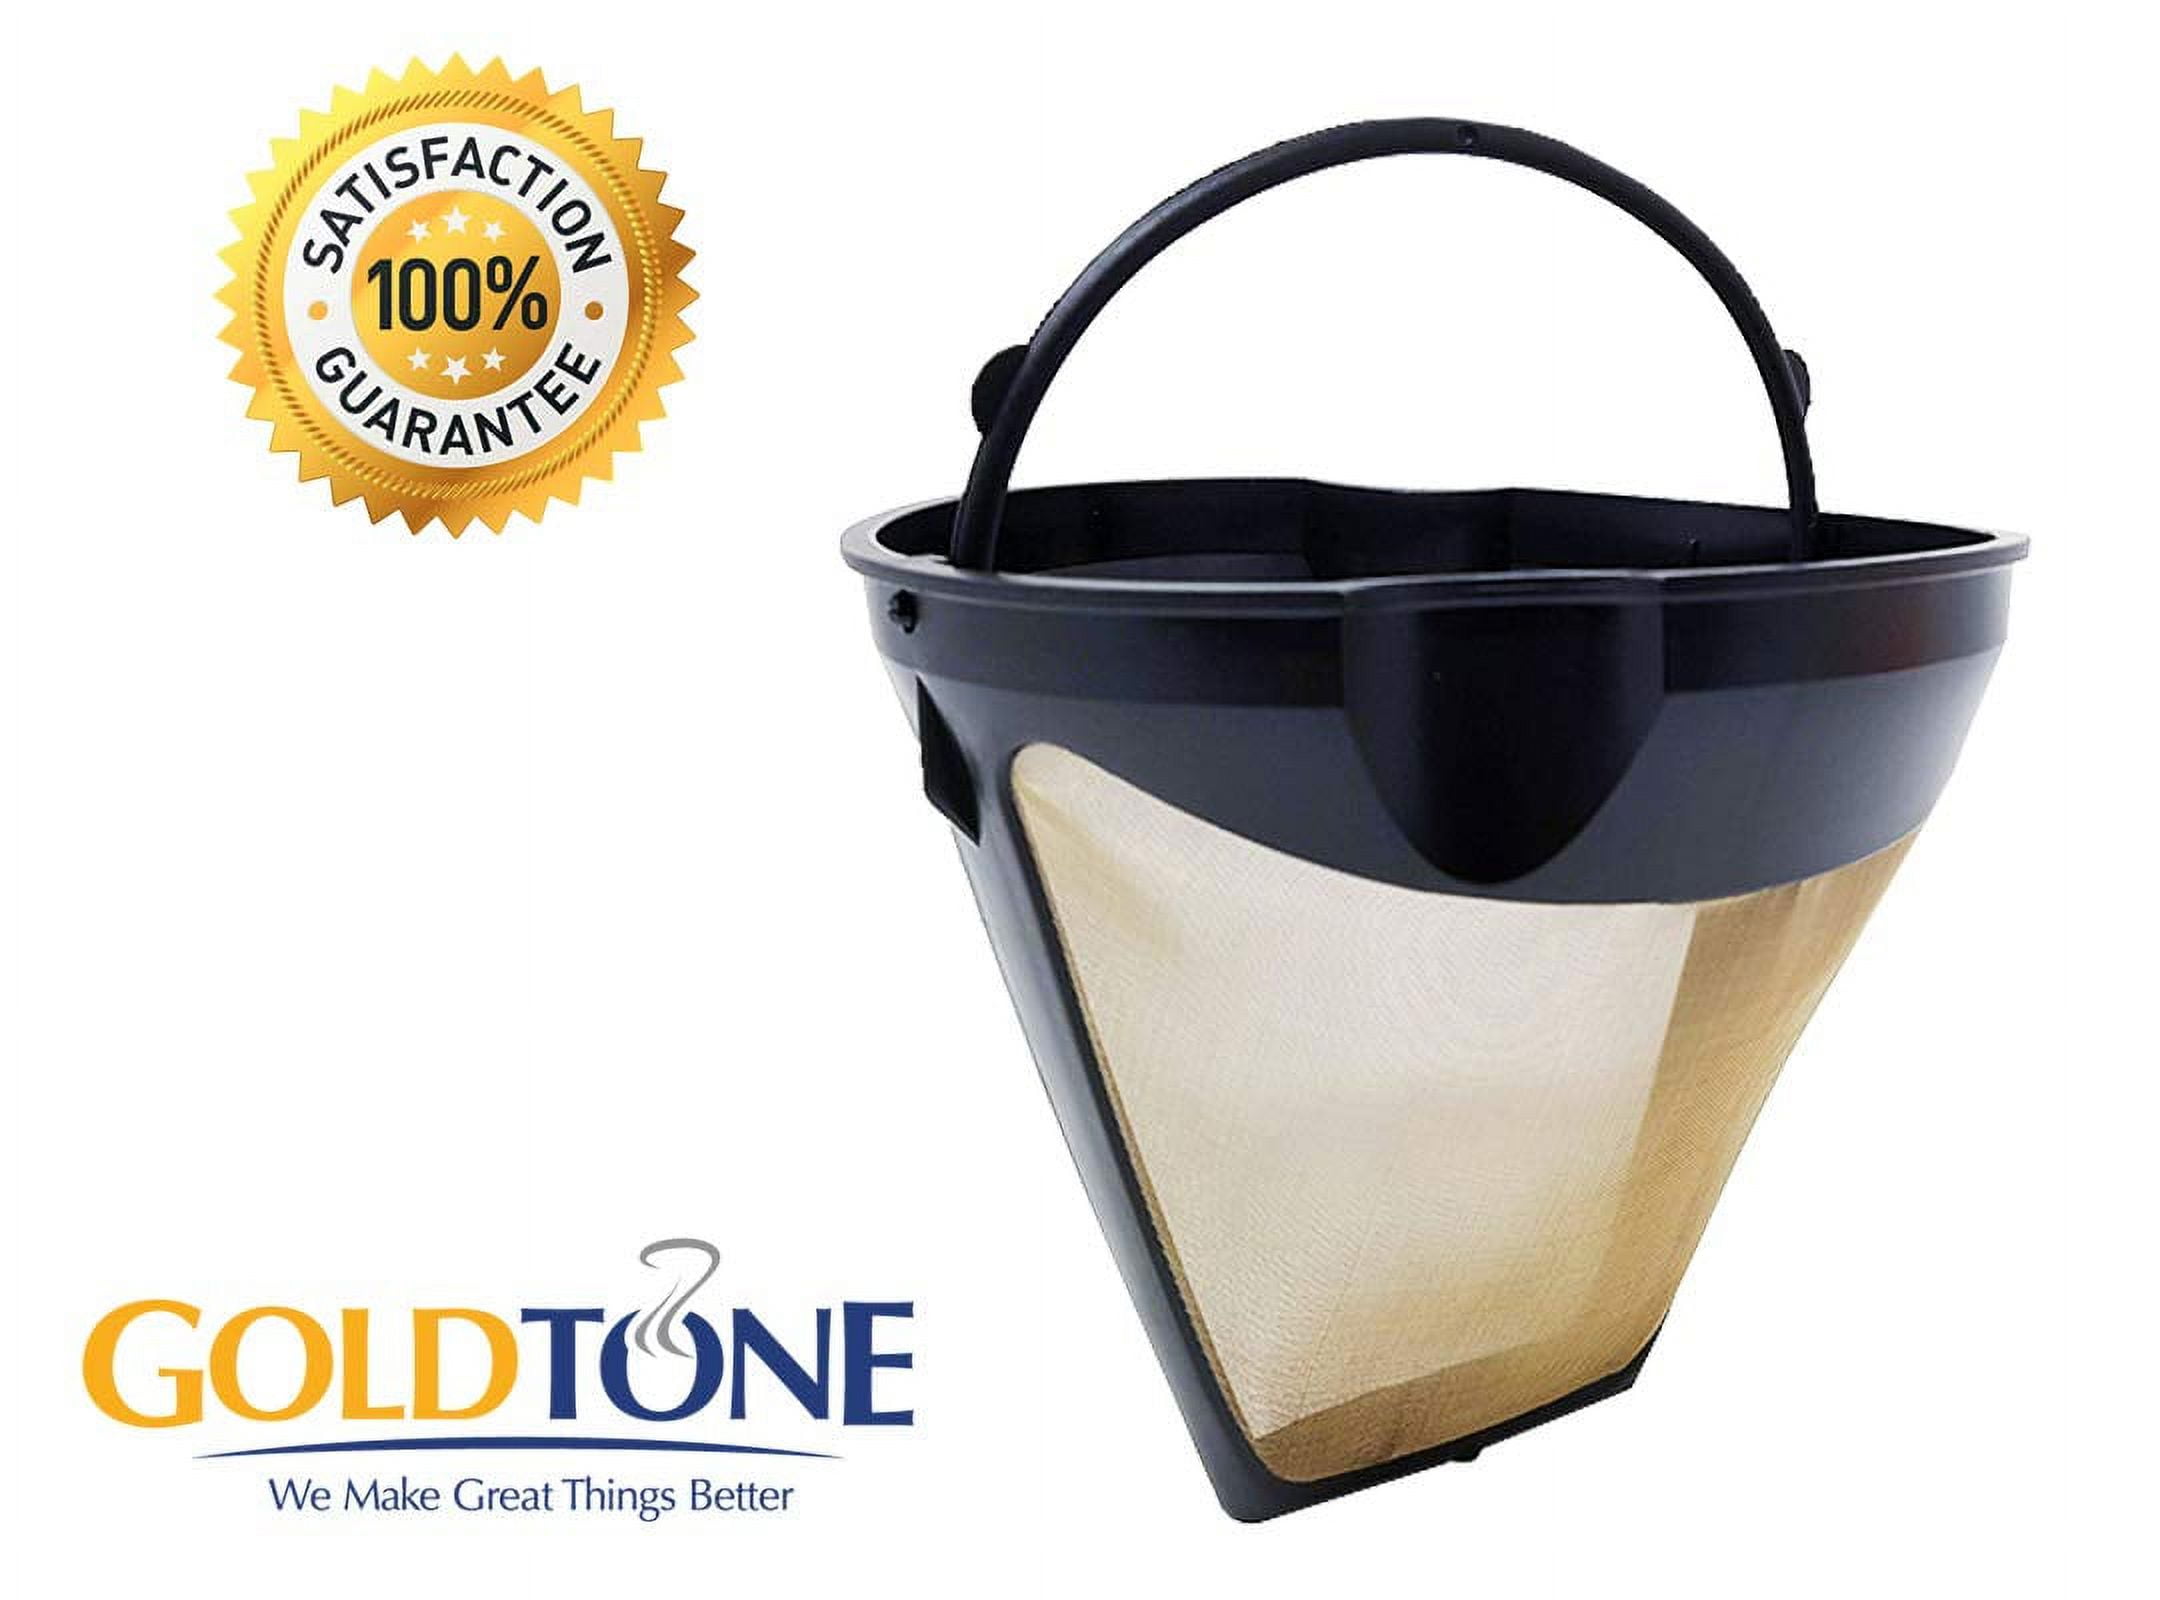 GoldTone Reusable #2, 4 Cup Cone Style Replacement Coffee Filter, Fits Black +Decker Coffee Makers and Brewers - Bed Bath & Beyond - 18044314